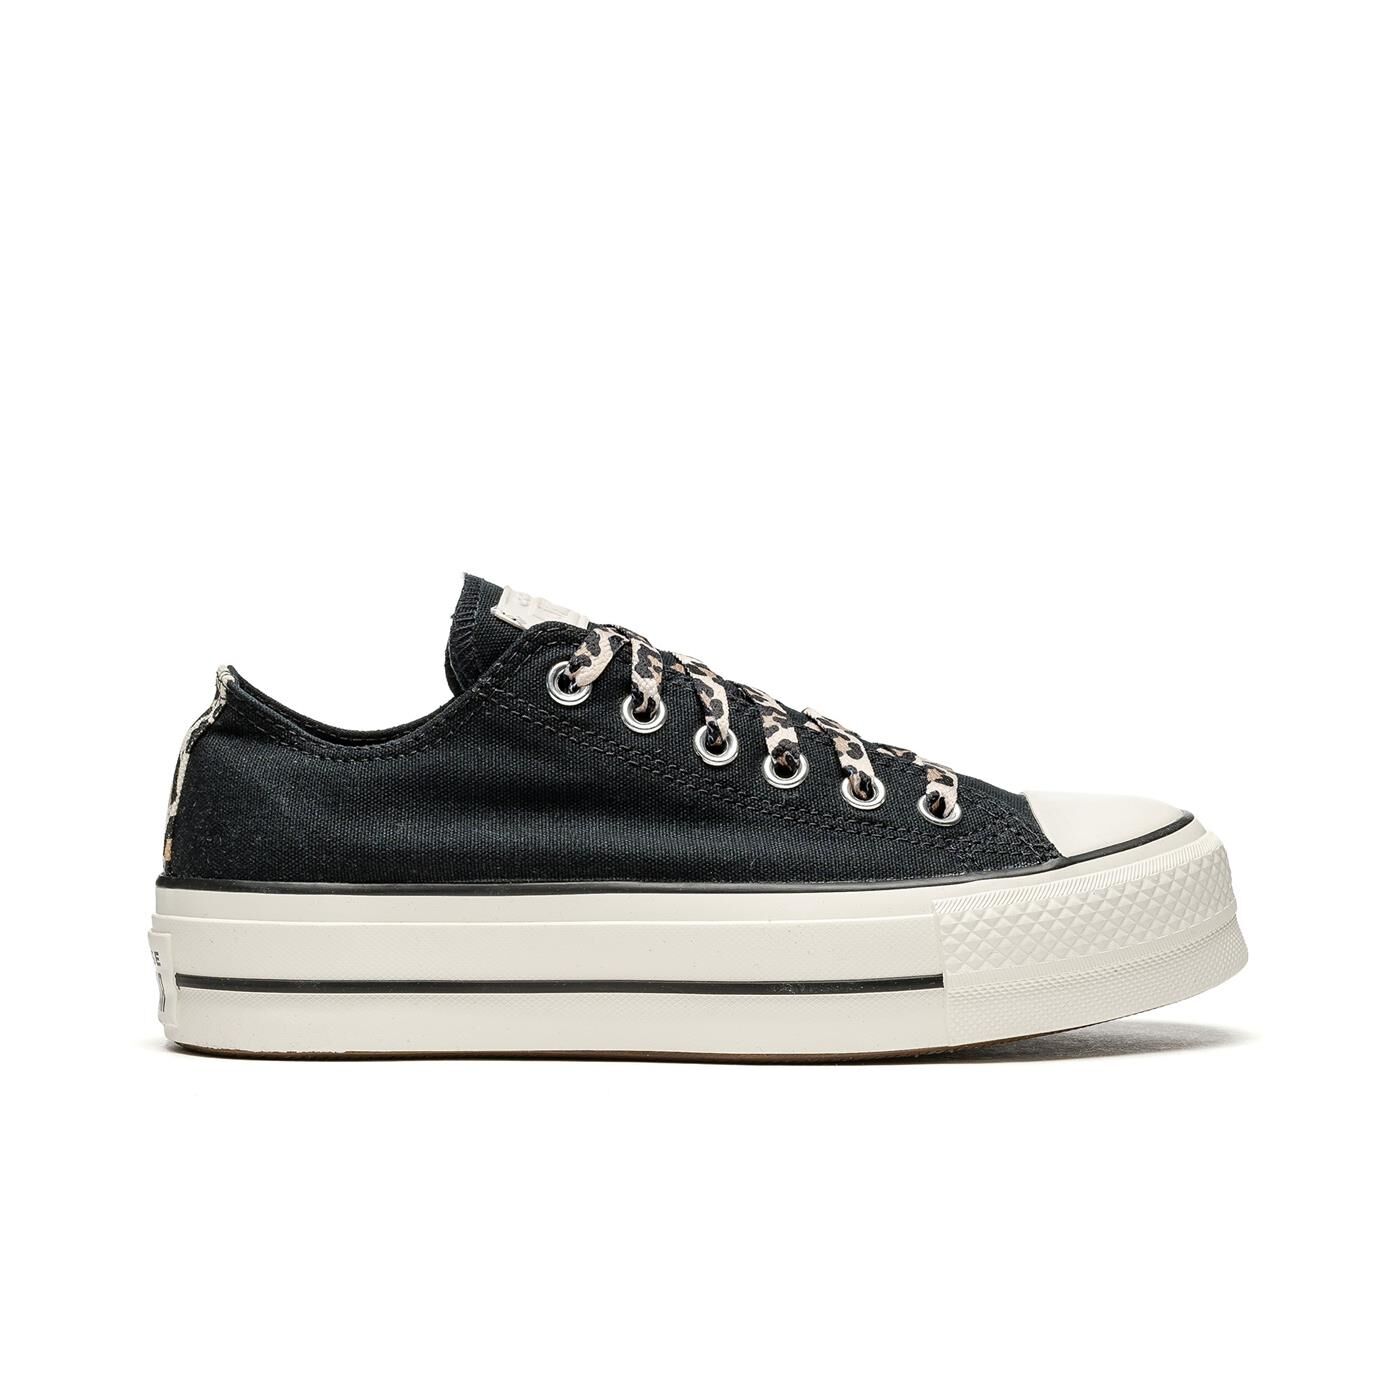 Converse Archive Print Chuck Taylor All Star Lift Ox